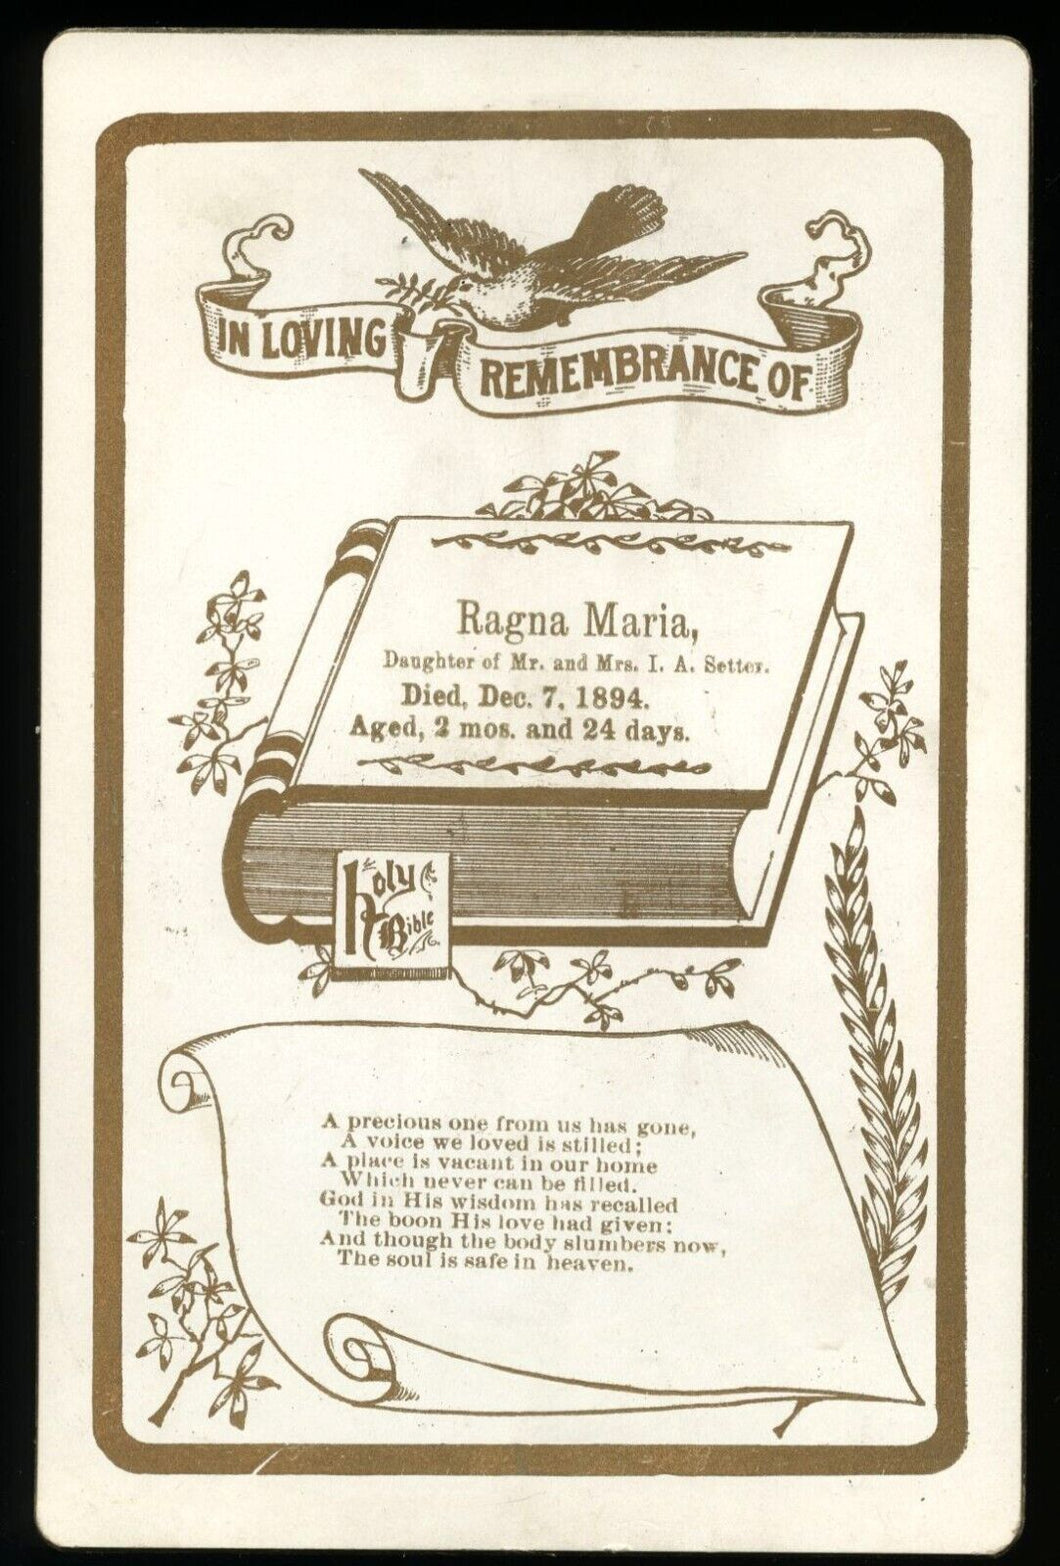 White Memorial Mourning Card 2 Month Old Baby Died of Bronchitis Memento Mori